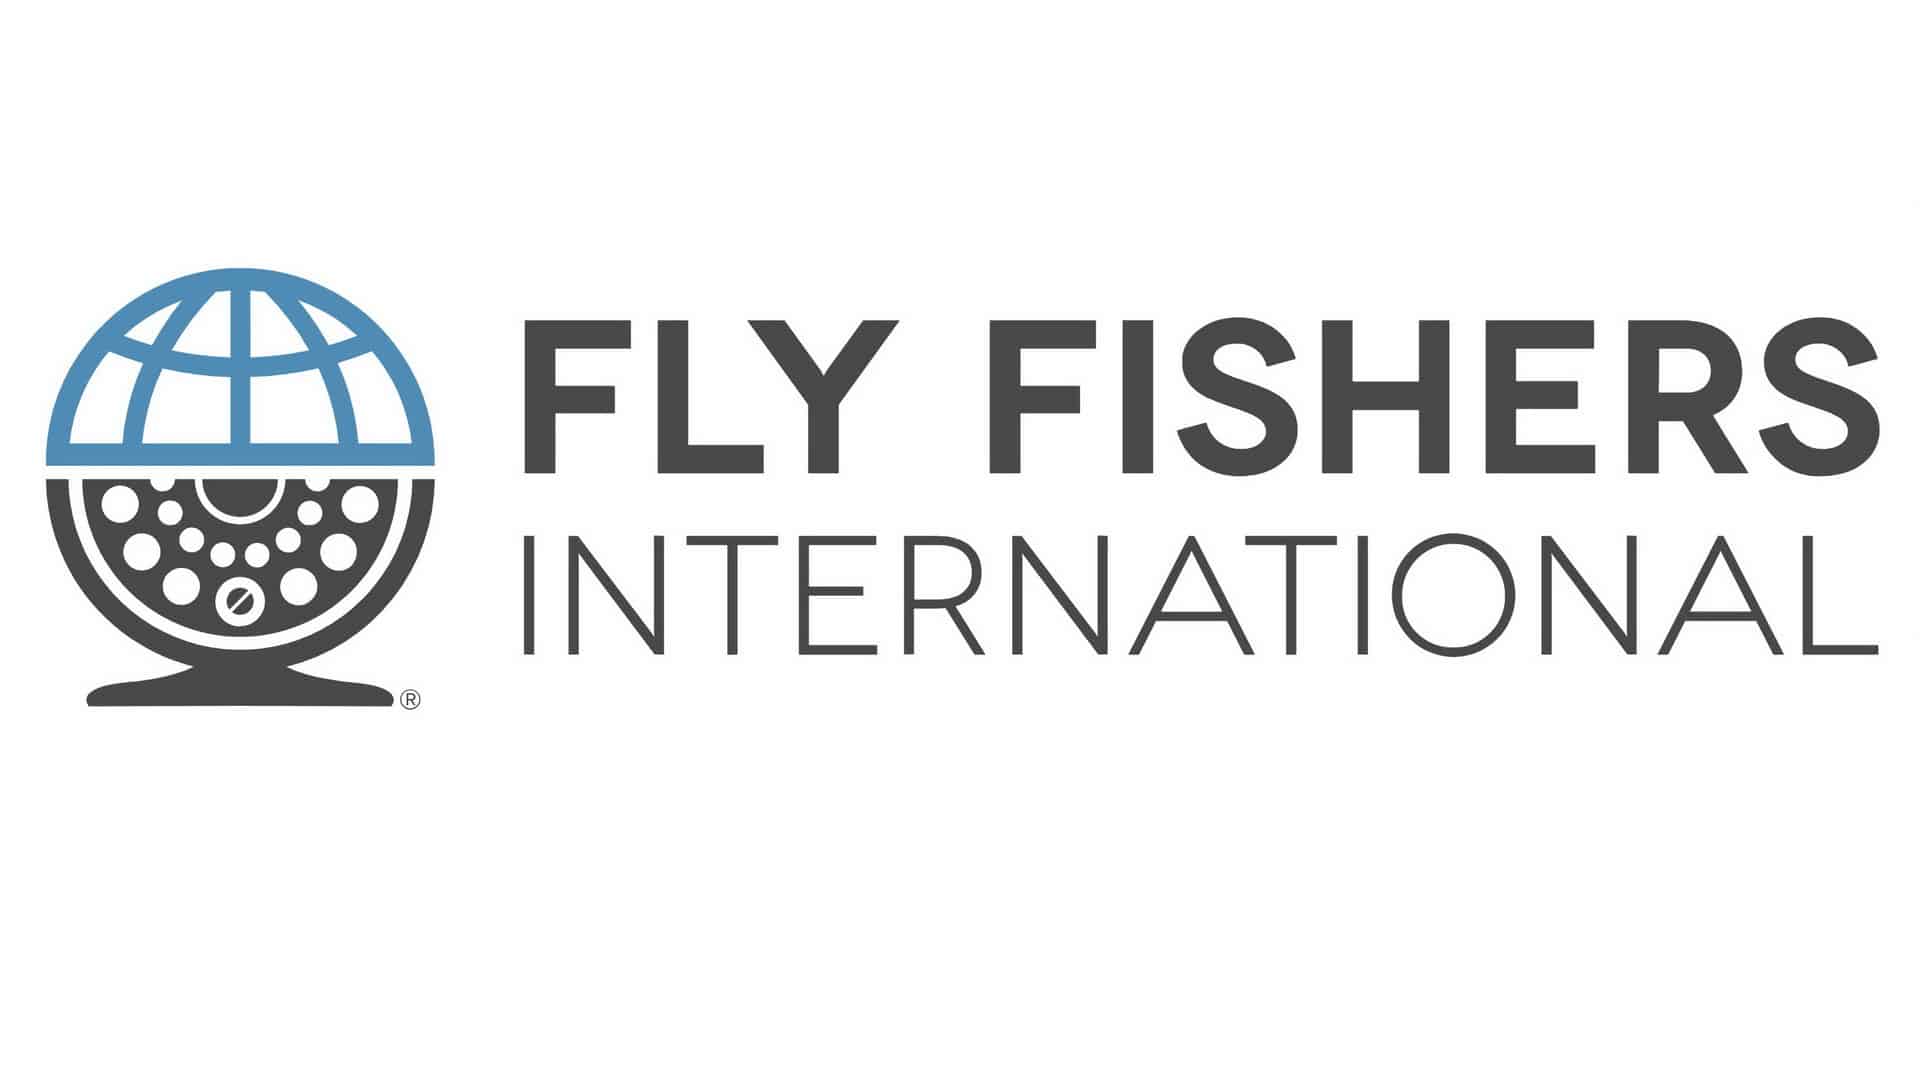 Fly Fishers International Announces Partnership with Pure Fishing, Hardy